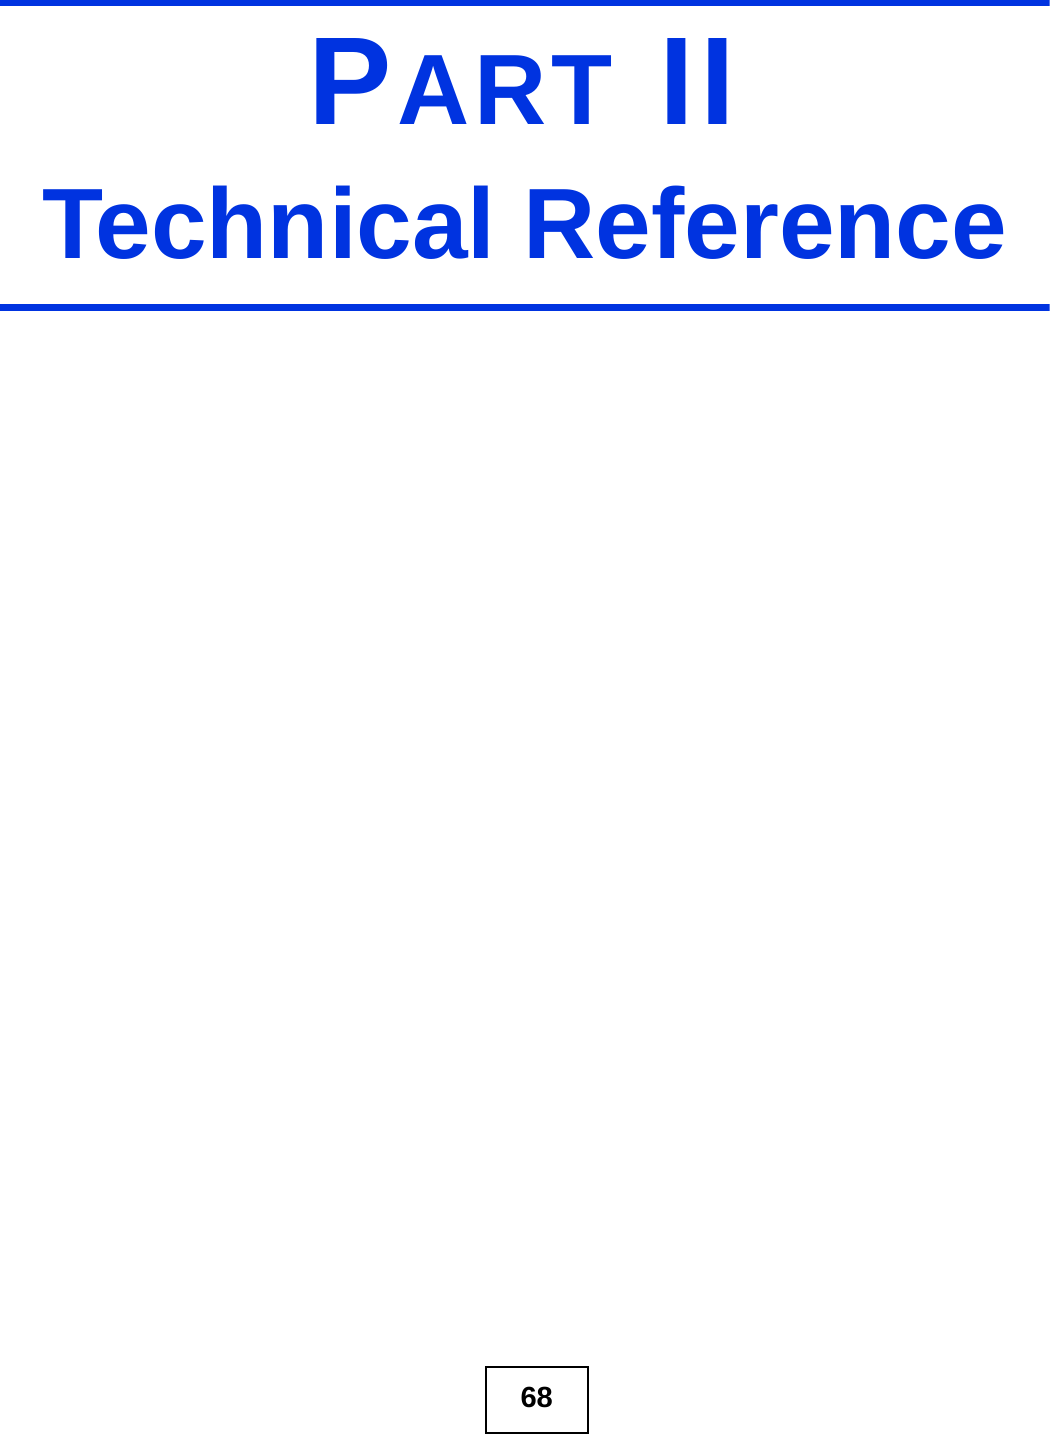 68PART IITechnical Reference